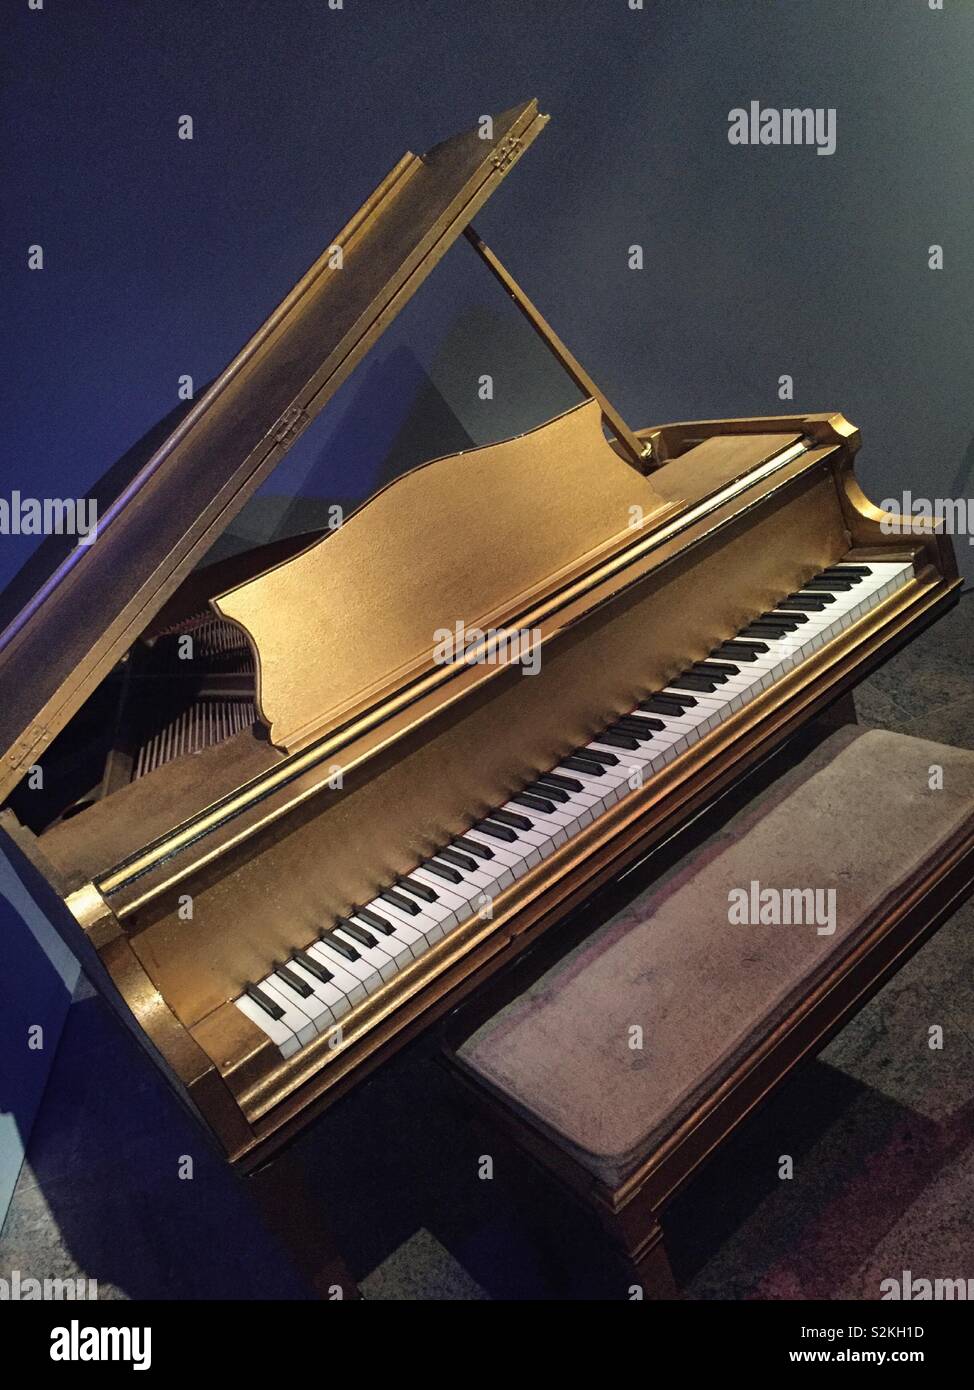 Piano used by Jerry Lee Lewis in the 50s, instruments of rock 'n' roll  exhibit at the Metropolitan Museum of Art, NYC, USA Stock Photo - Alamy